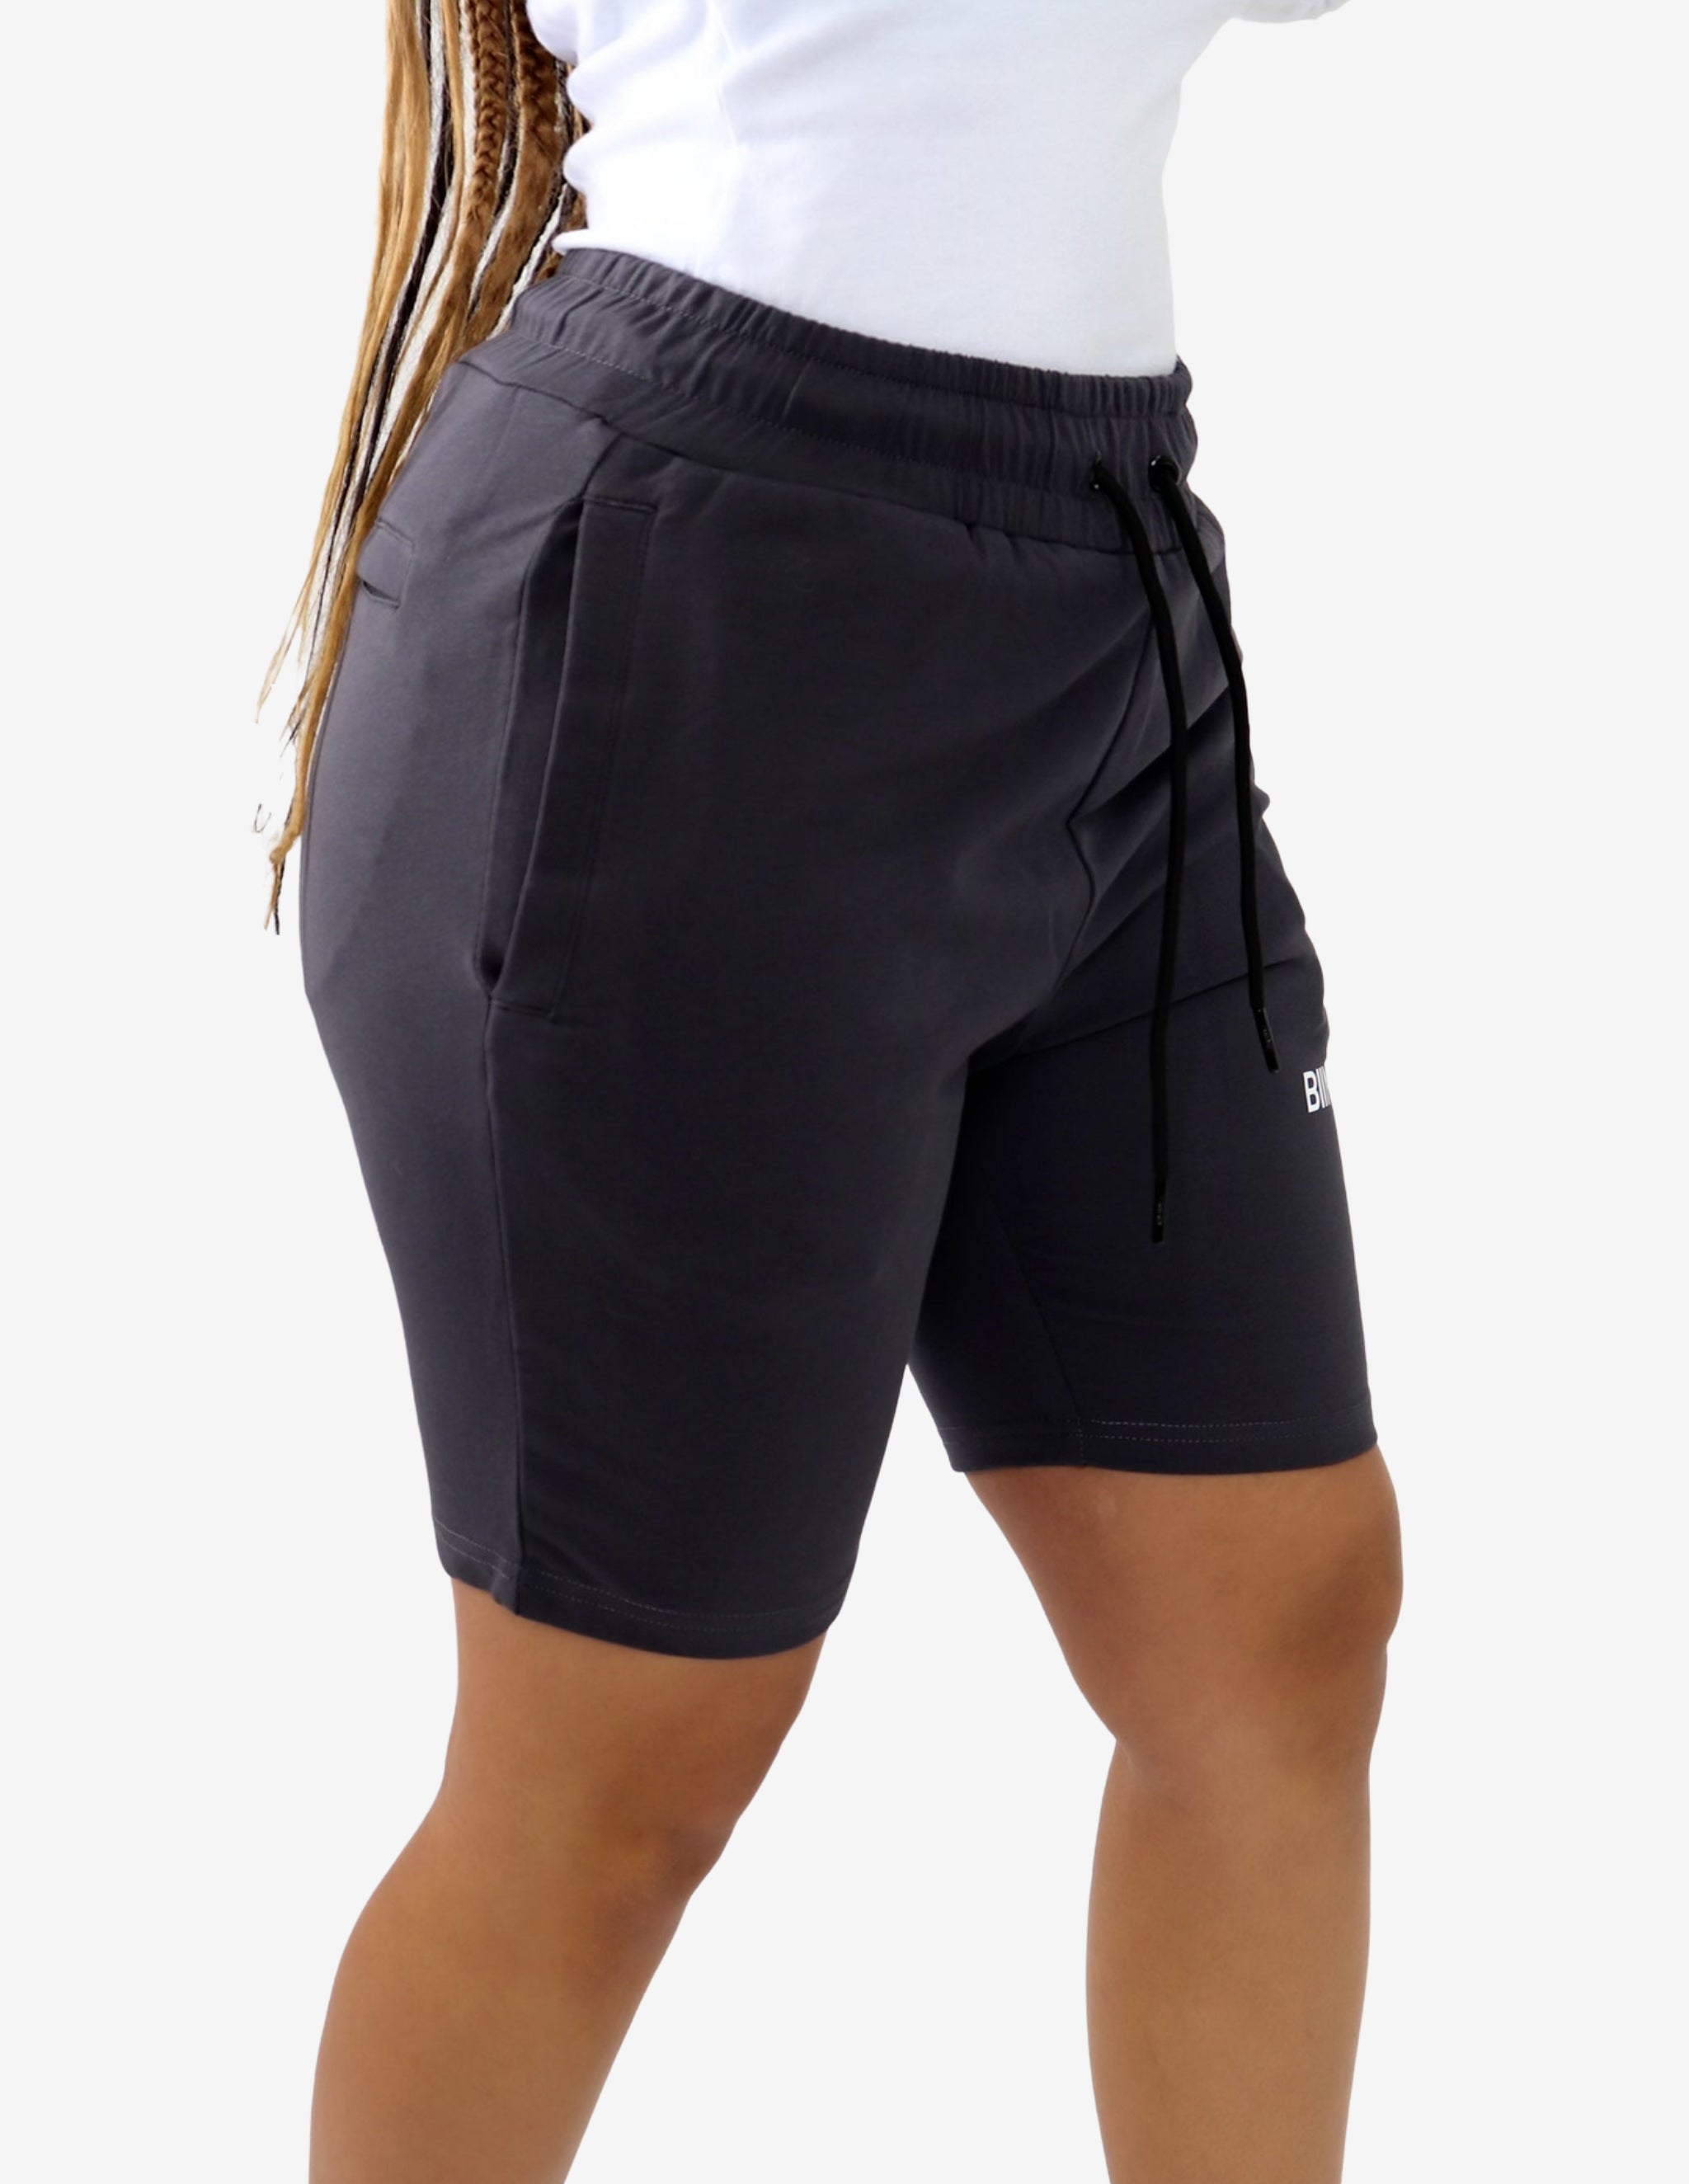 Regal Fitted Shorts - Stealth Grey